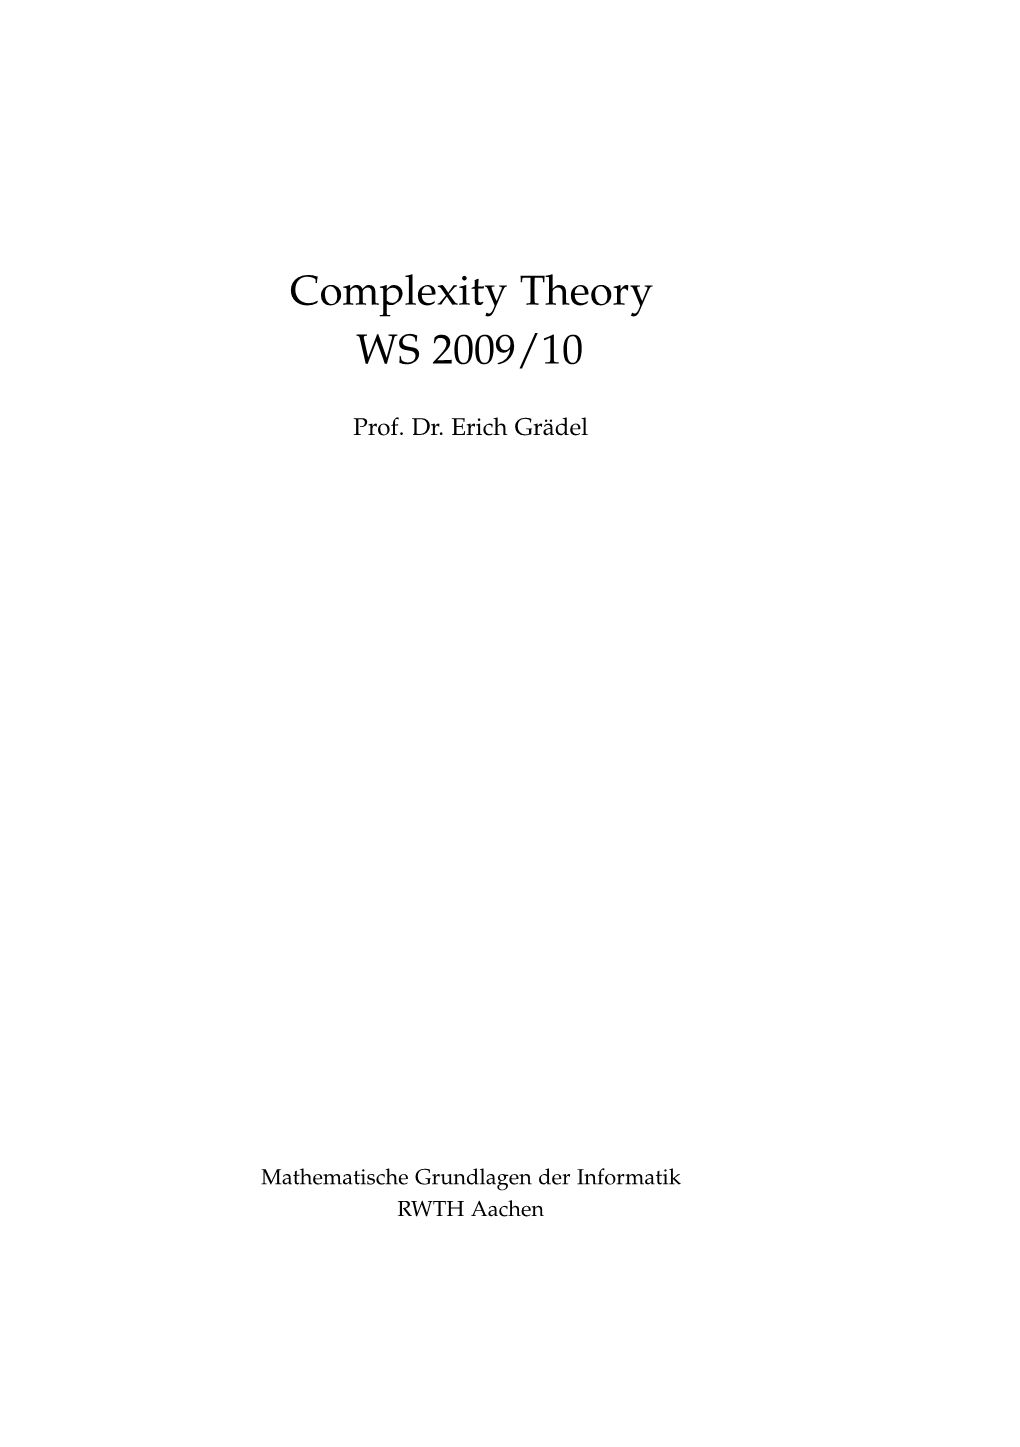 Complexity Theory WS 2009/10